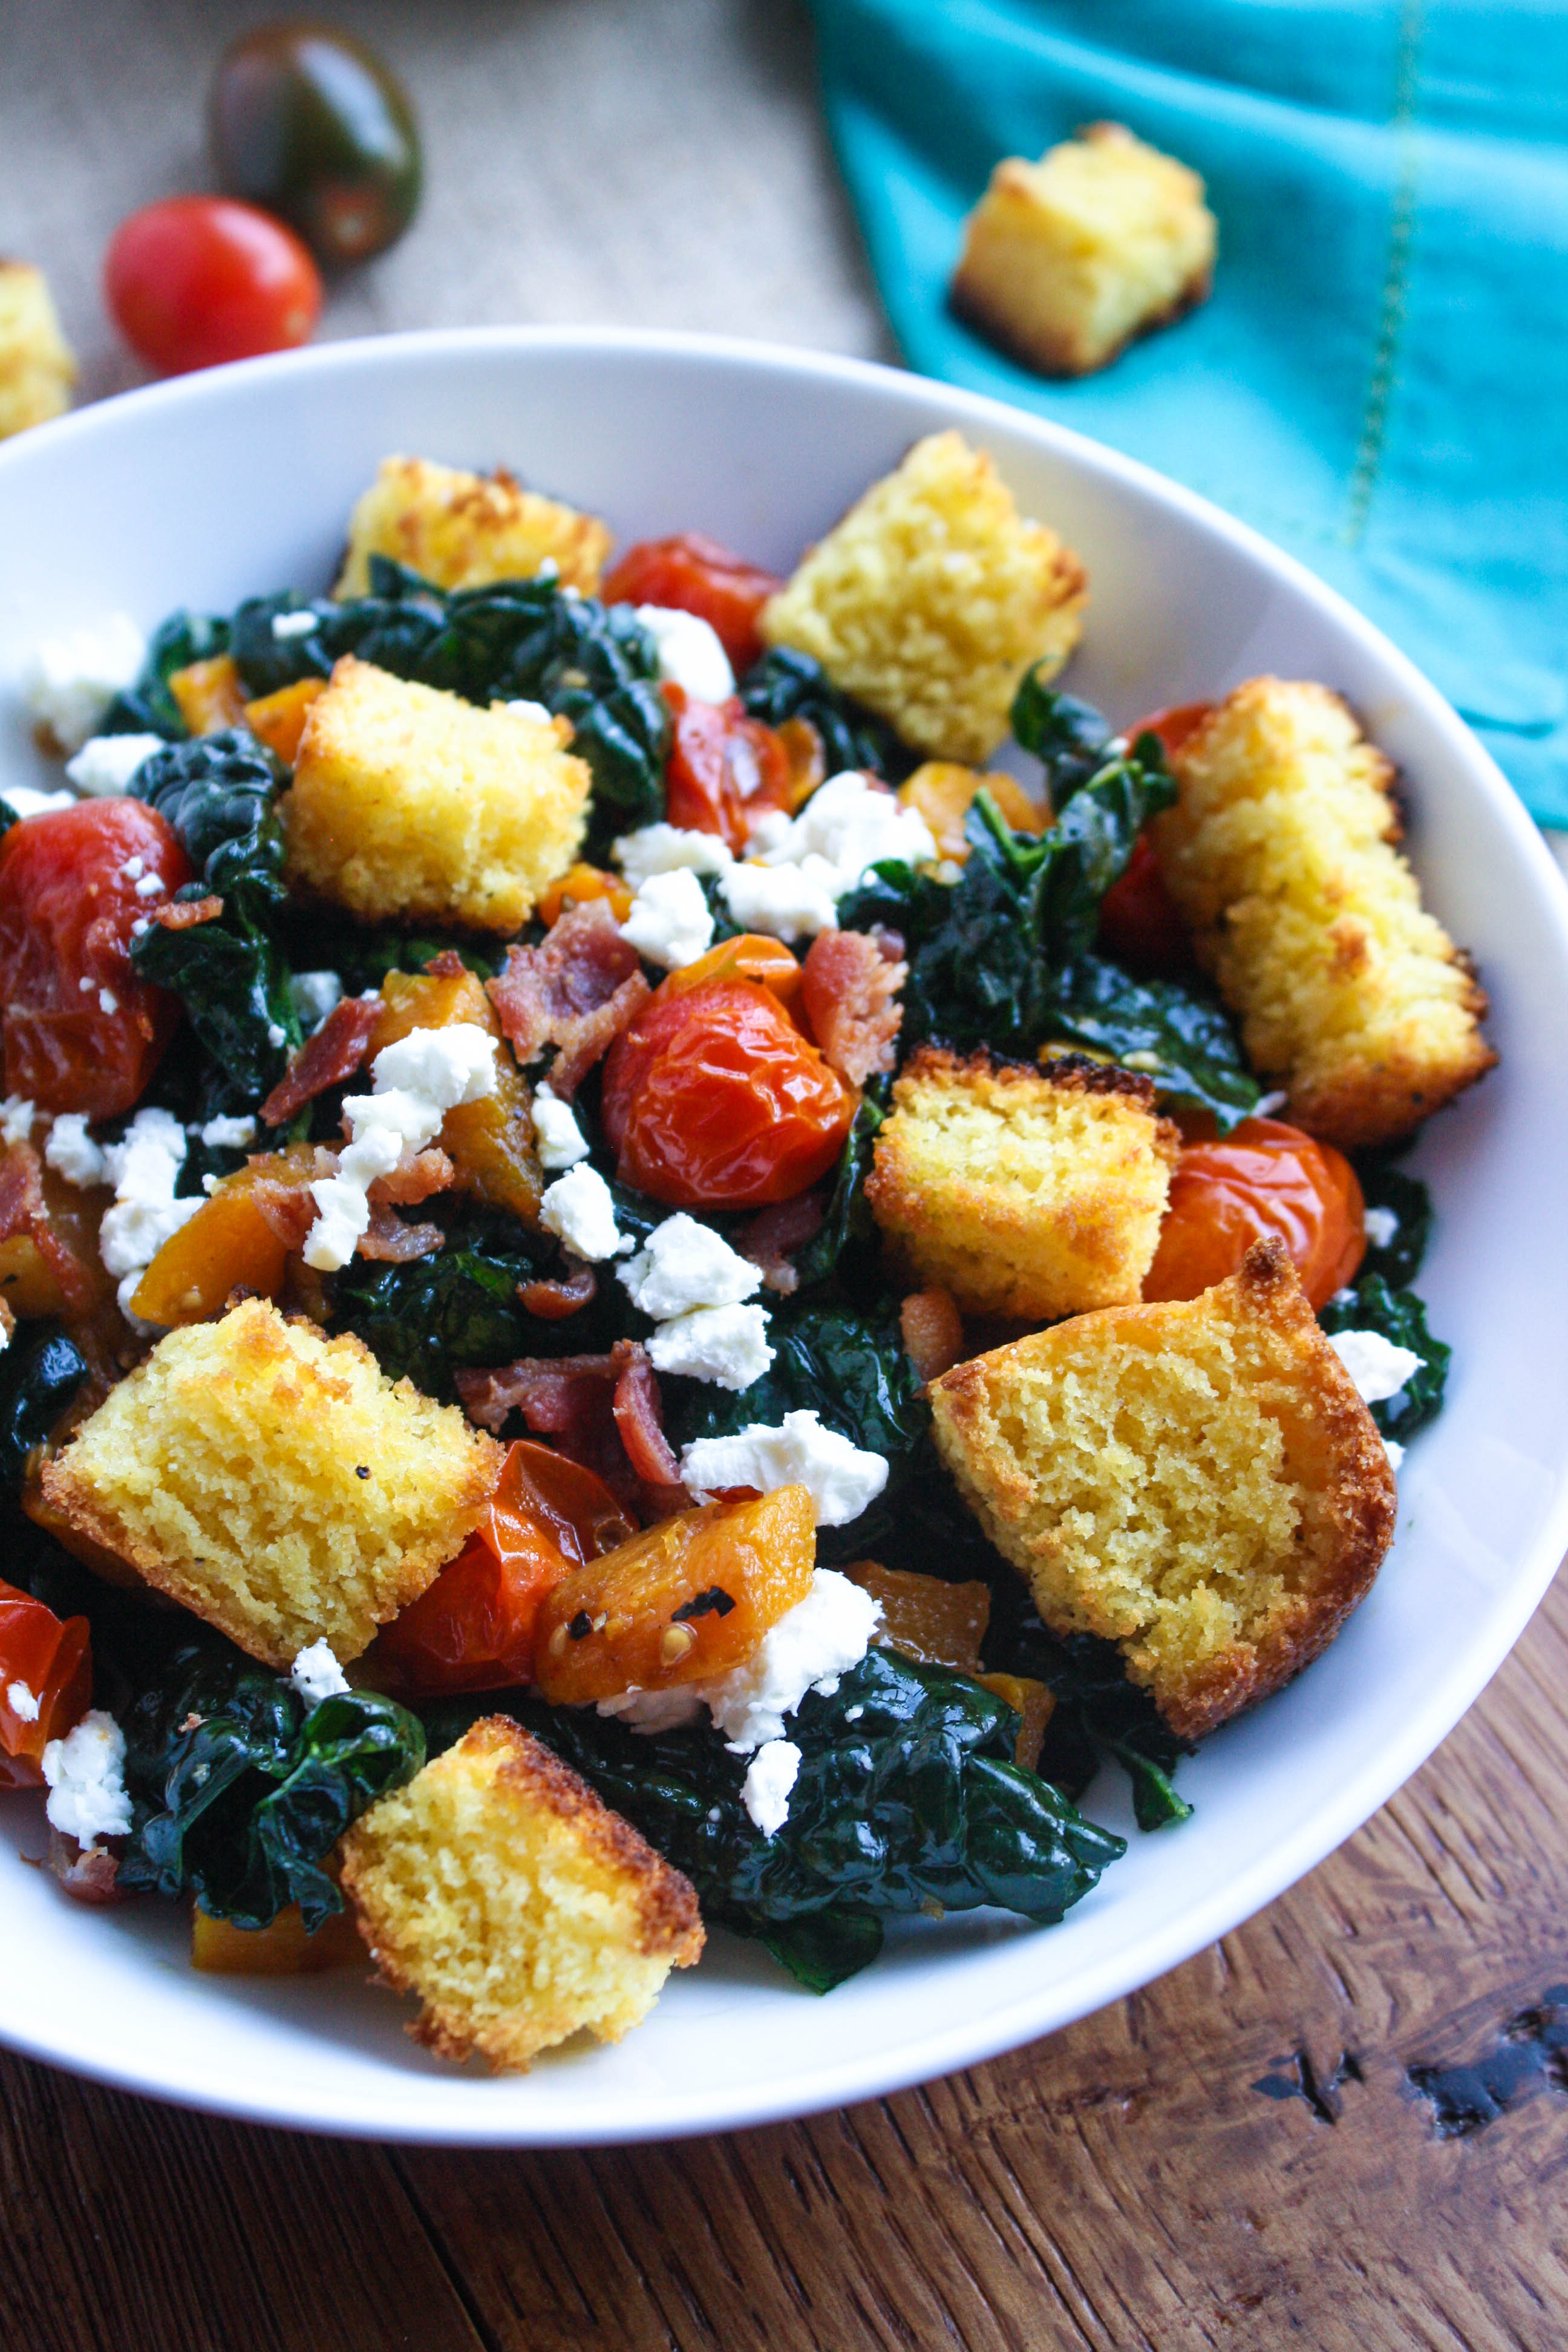 Kale and Cornbread Crouton Salad is a welcome dish the day after Thanksgiving. Use some leftovers to make the cornbread croutons for this wonderful kale salad!